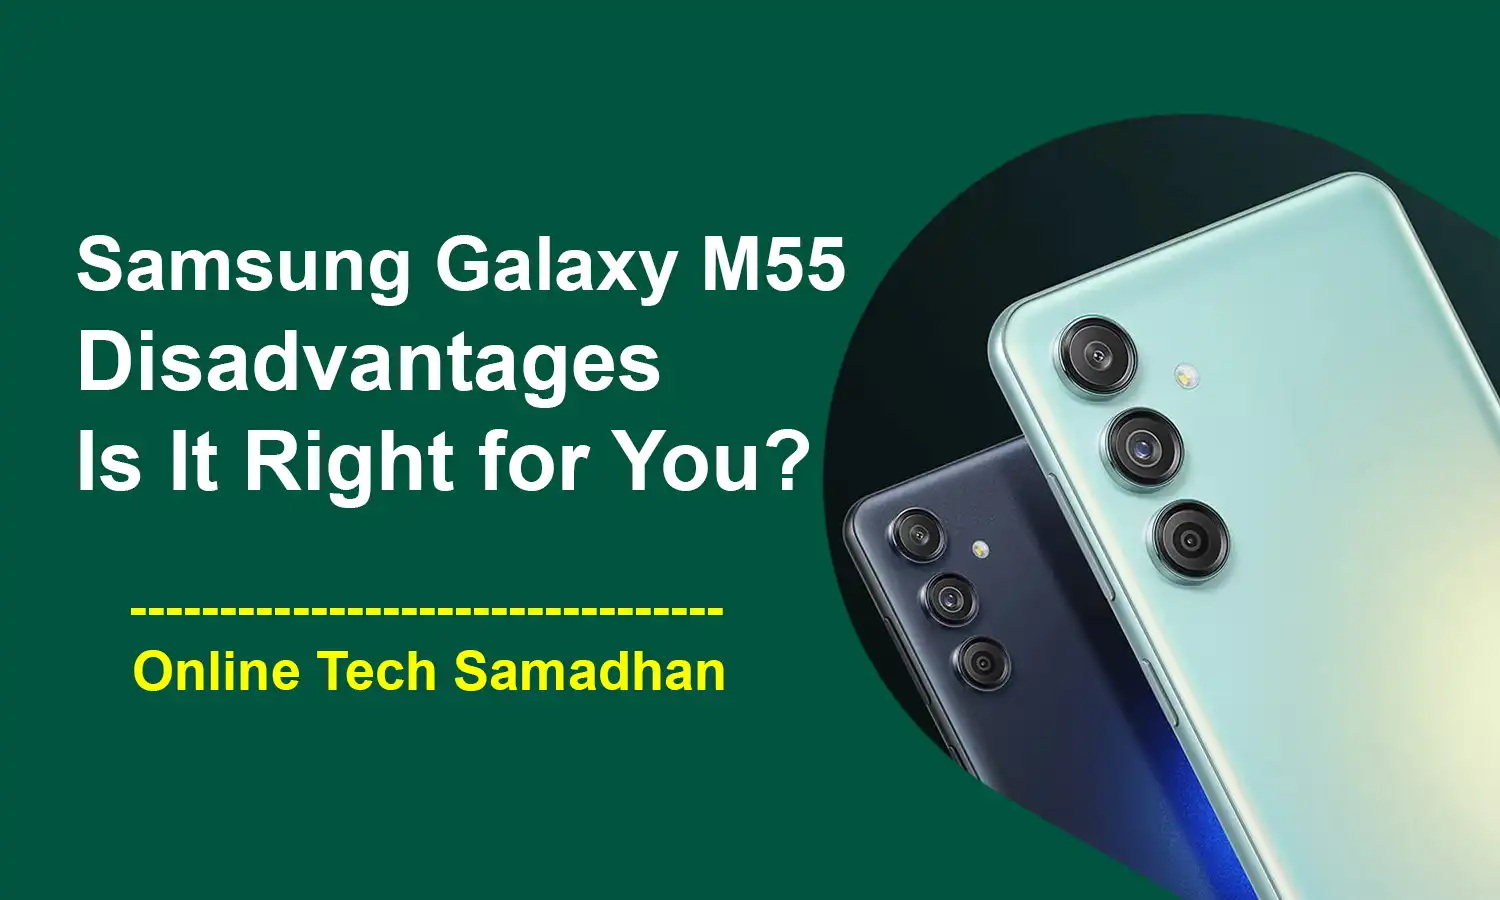 Samsung Galaxy M55 Disadvantages Is it Right for You